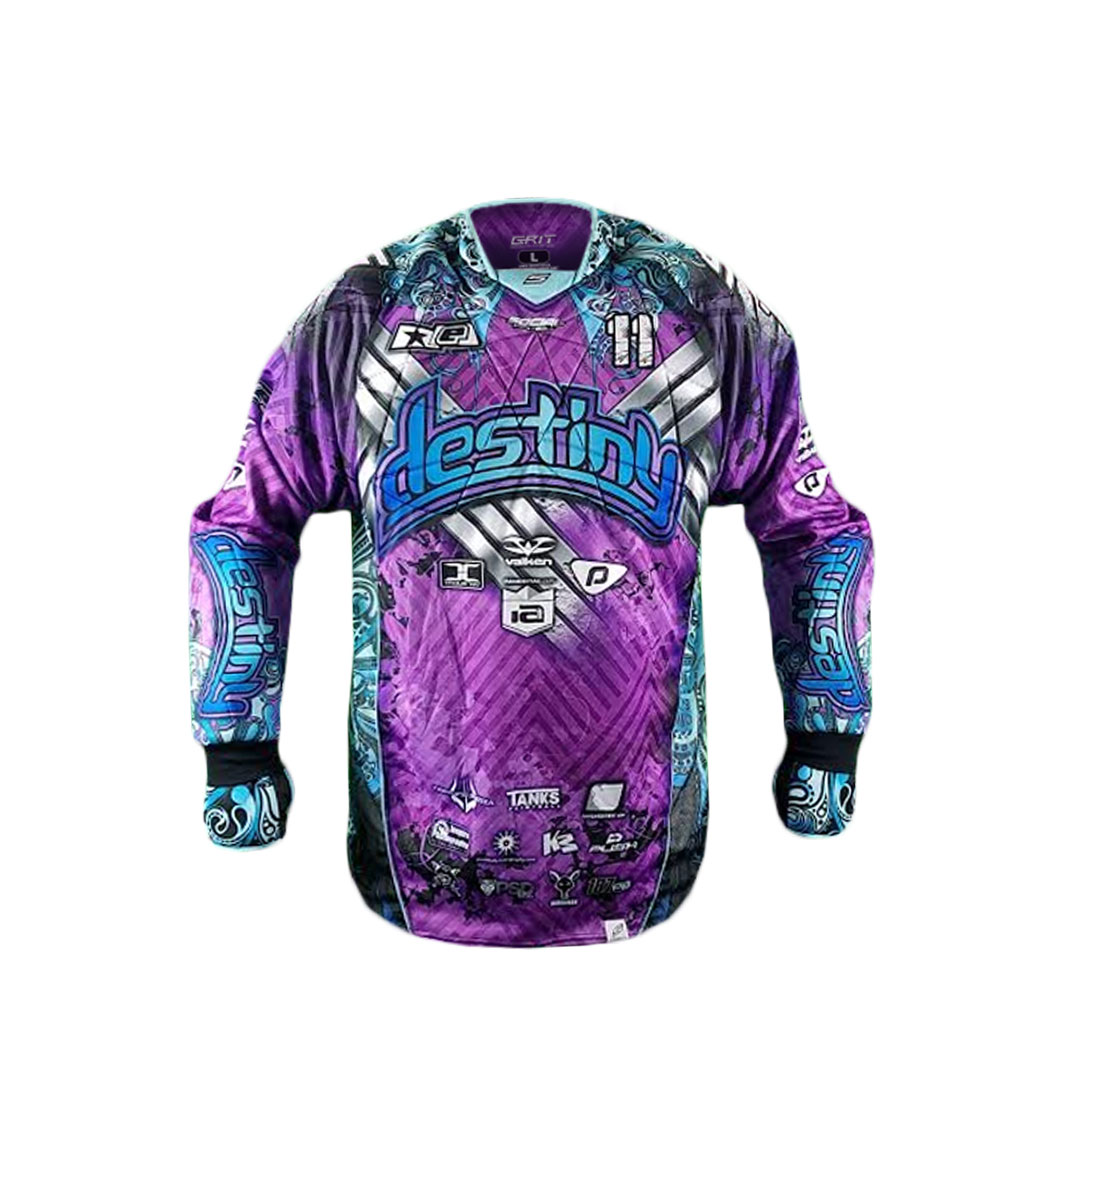 make your own paintball jersey